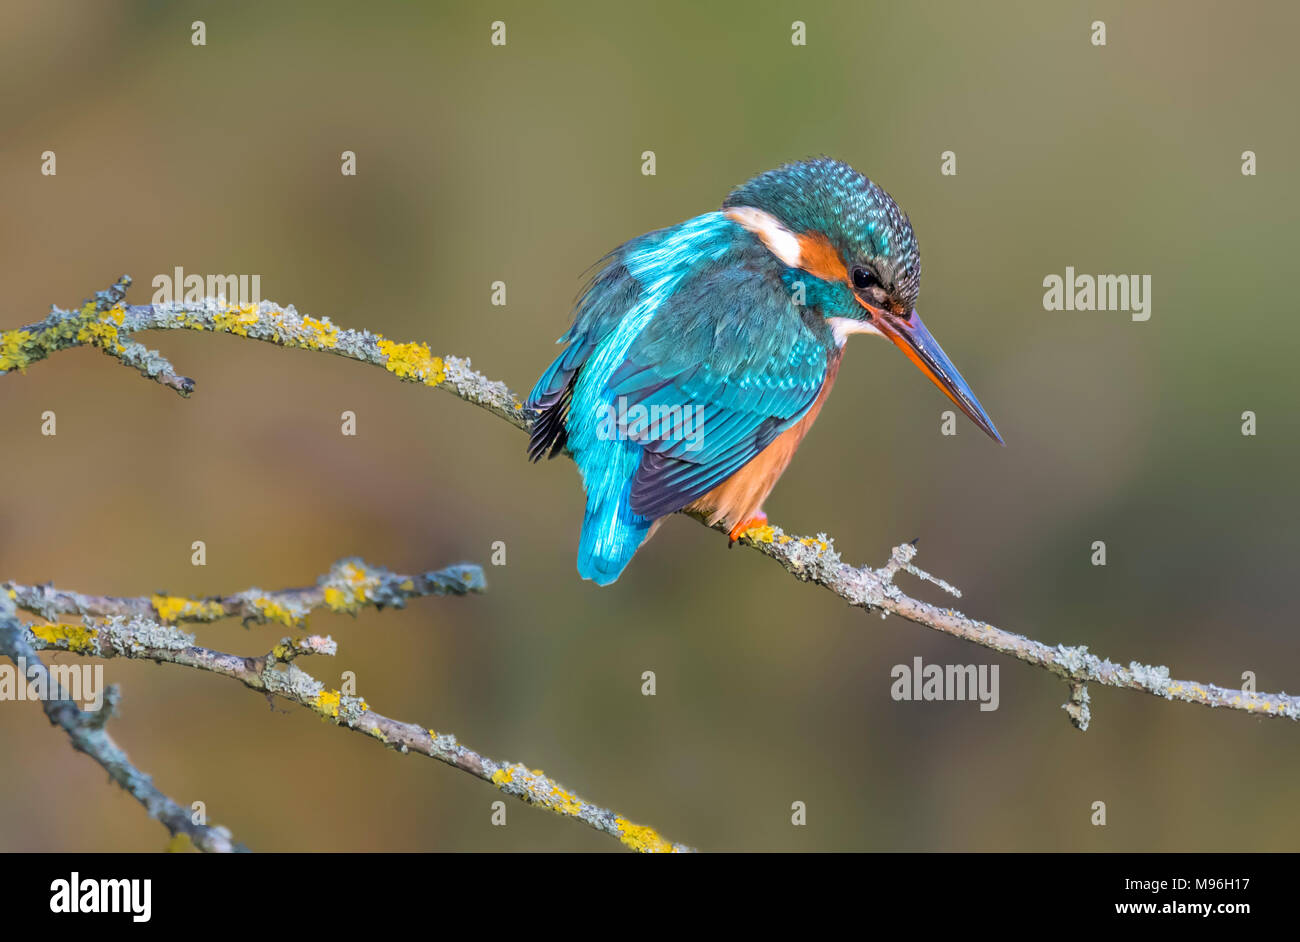 Alcedo atthis (adult female Kingfisher bird) perched on a twig on a cold day in Winter in Arundel, West Sussex, England, UK. Stock Photo